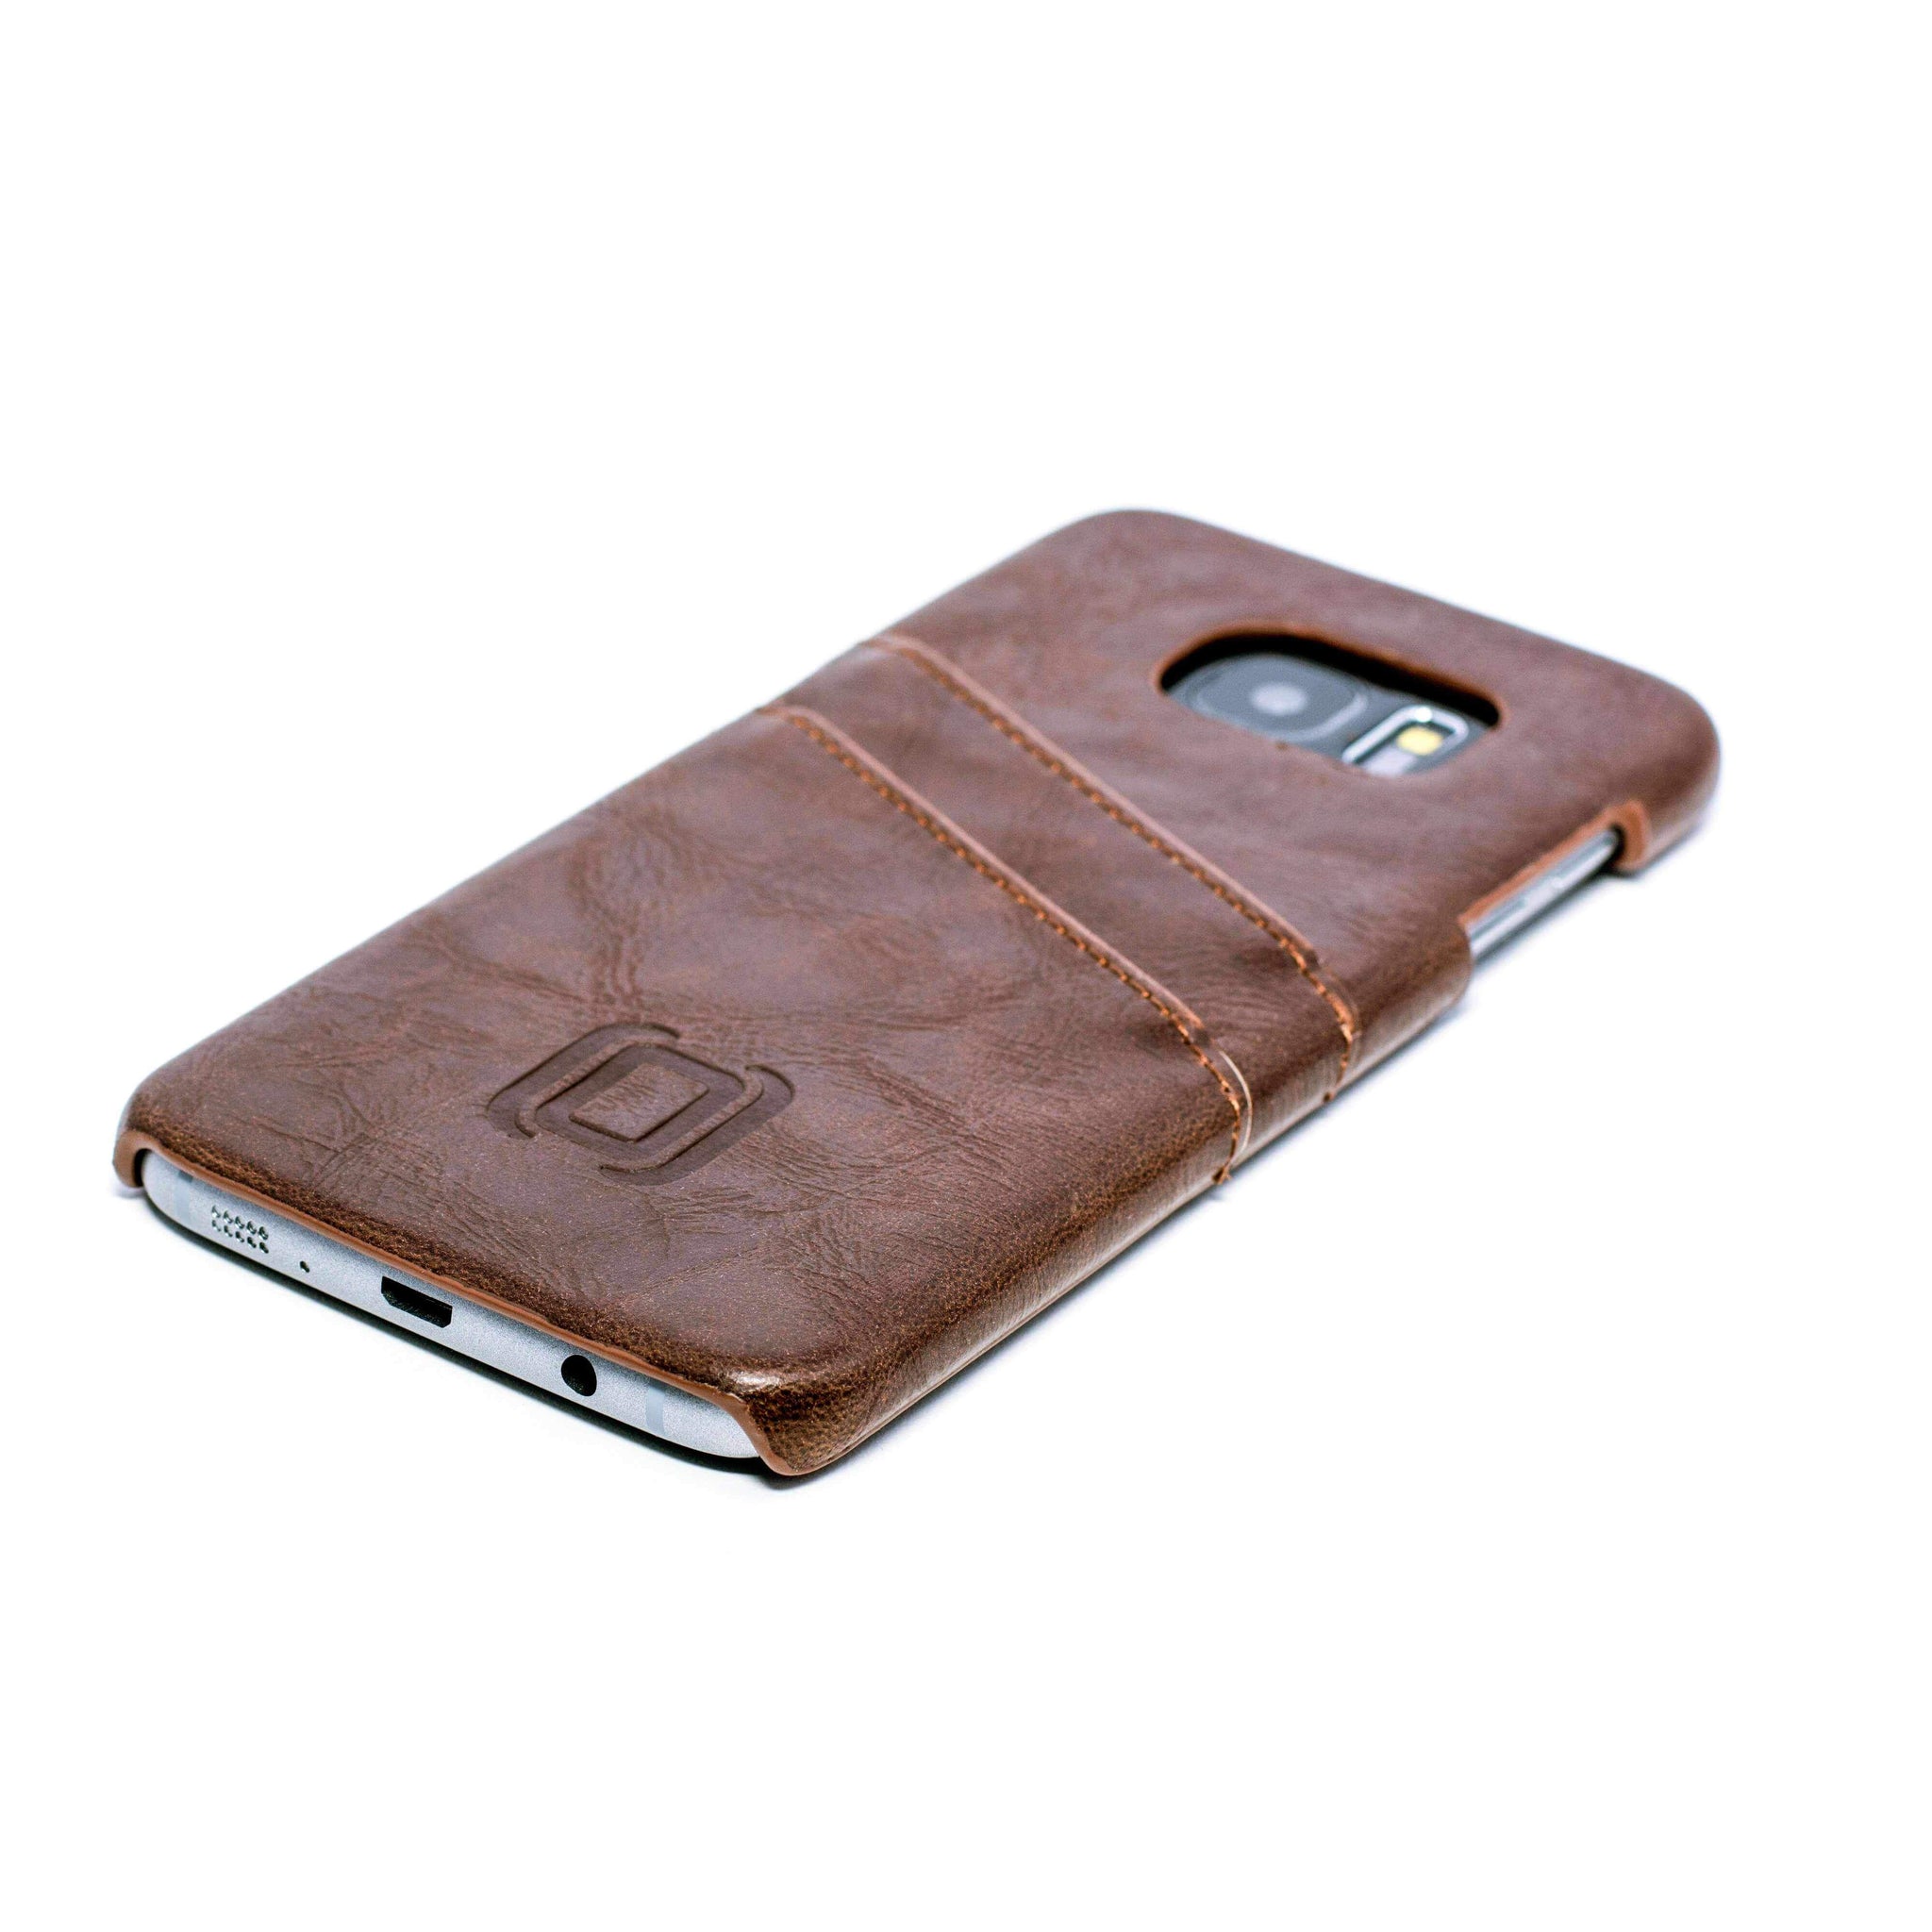 Synthetic Wallet Case for Samsung Galaxy & S7 Edge in Jet Black or Vintage Brown Dockem